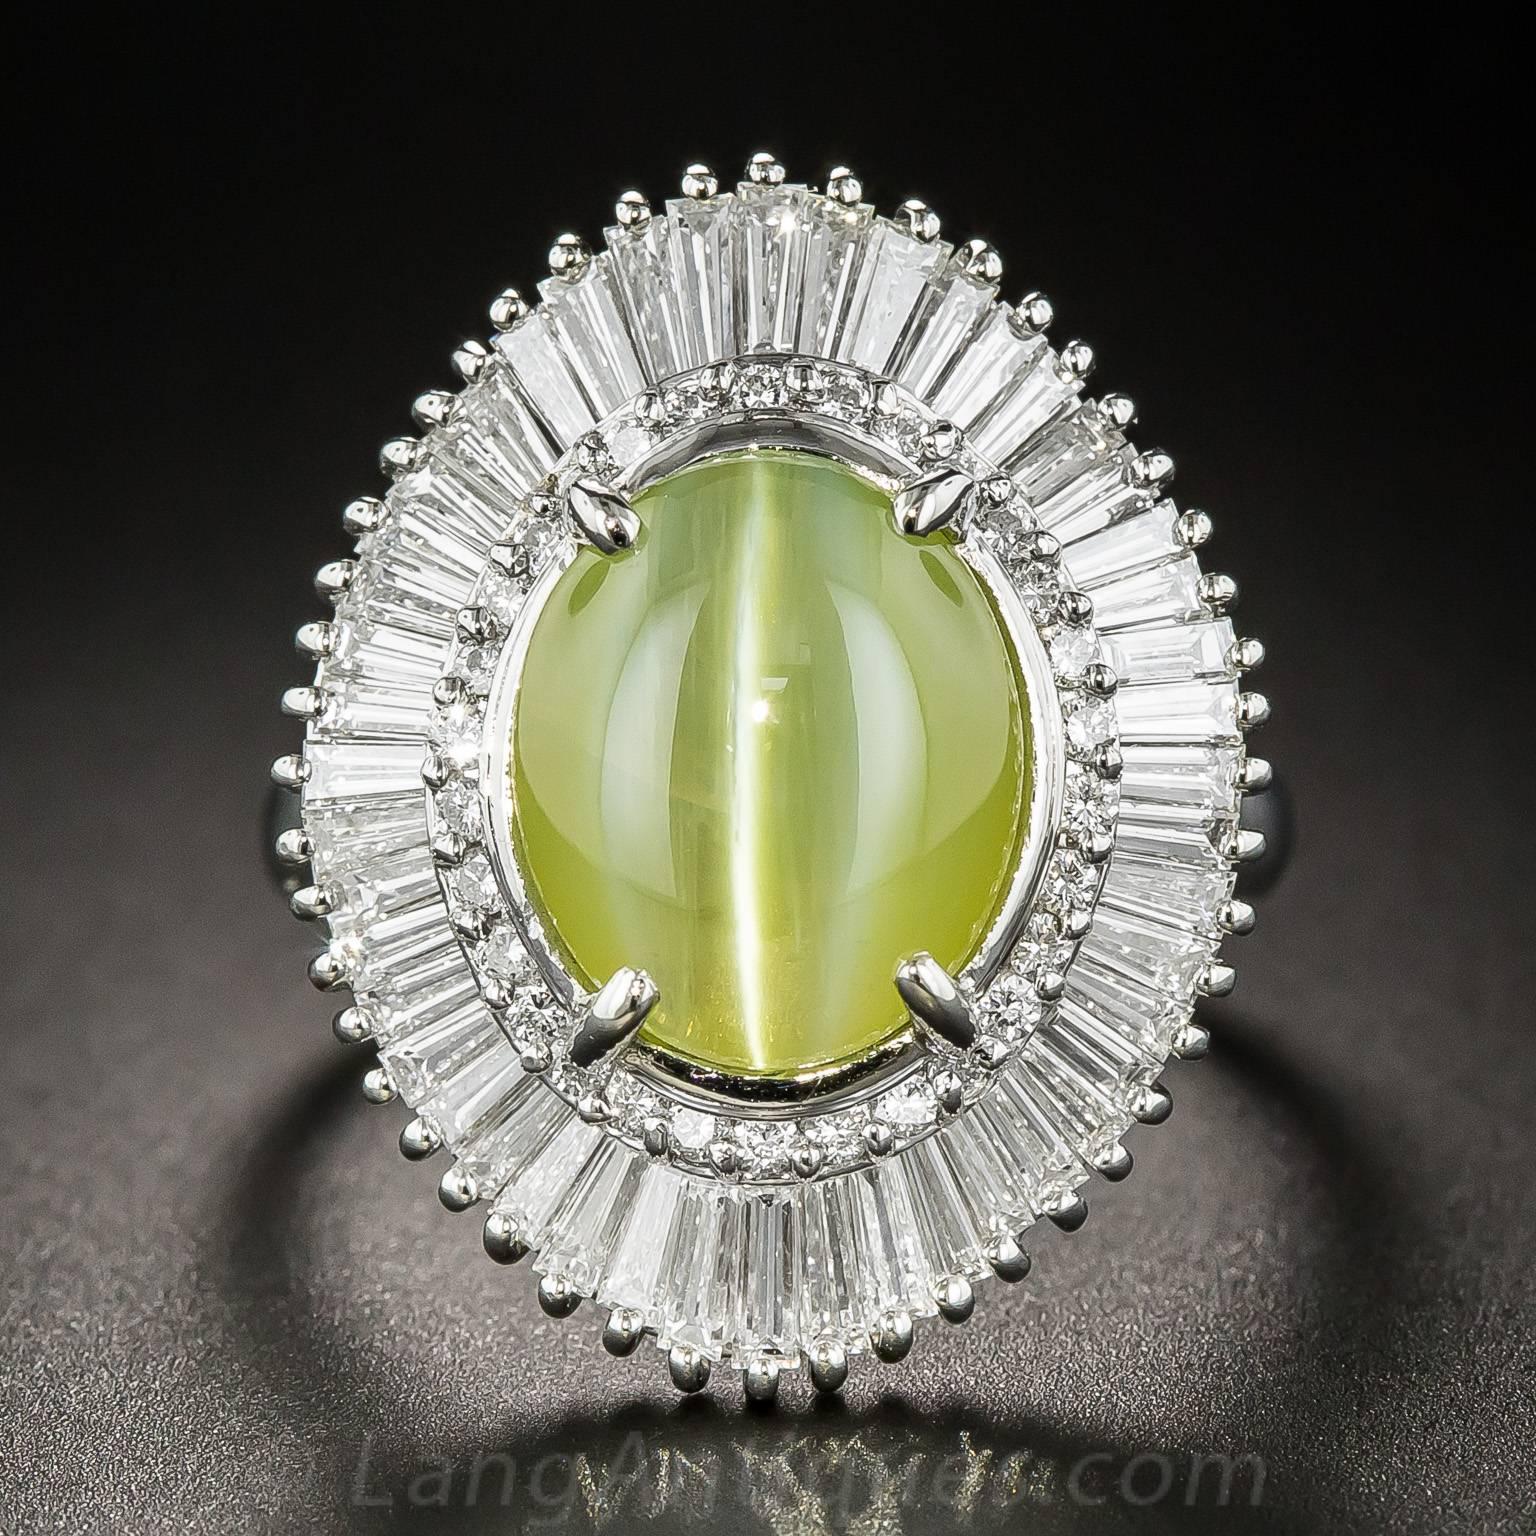 A crystalline, luminous and mesmerizing gemstone, a 7.55 carat chrysoberyl cat's-eye imbued with a sweet greenish honey color and exemplary chatoyancy (the sharp white cat's-eye) winks at you night and day from the center of a gorgeous ballerina